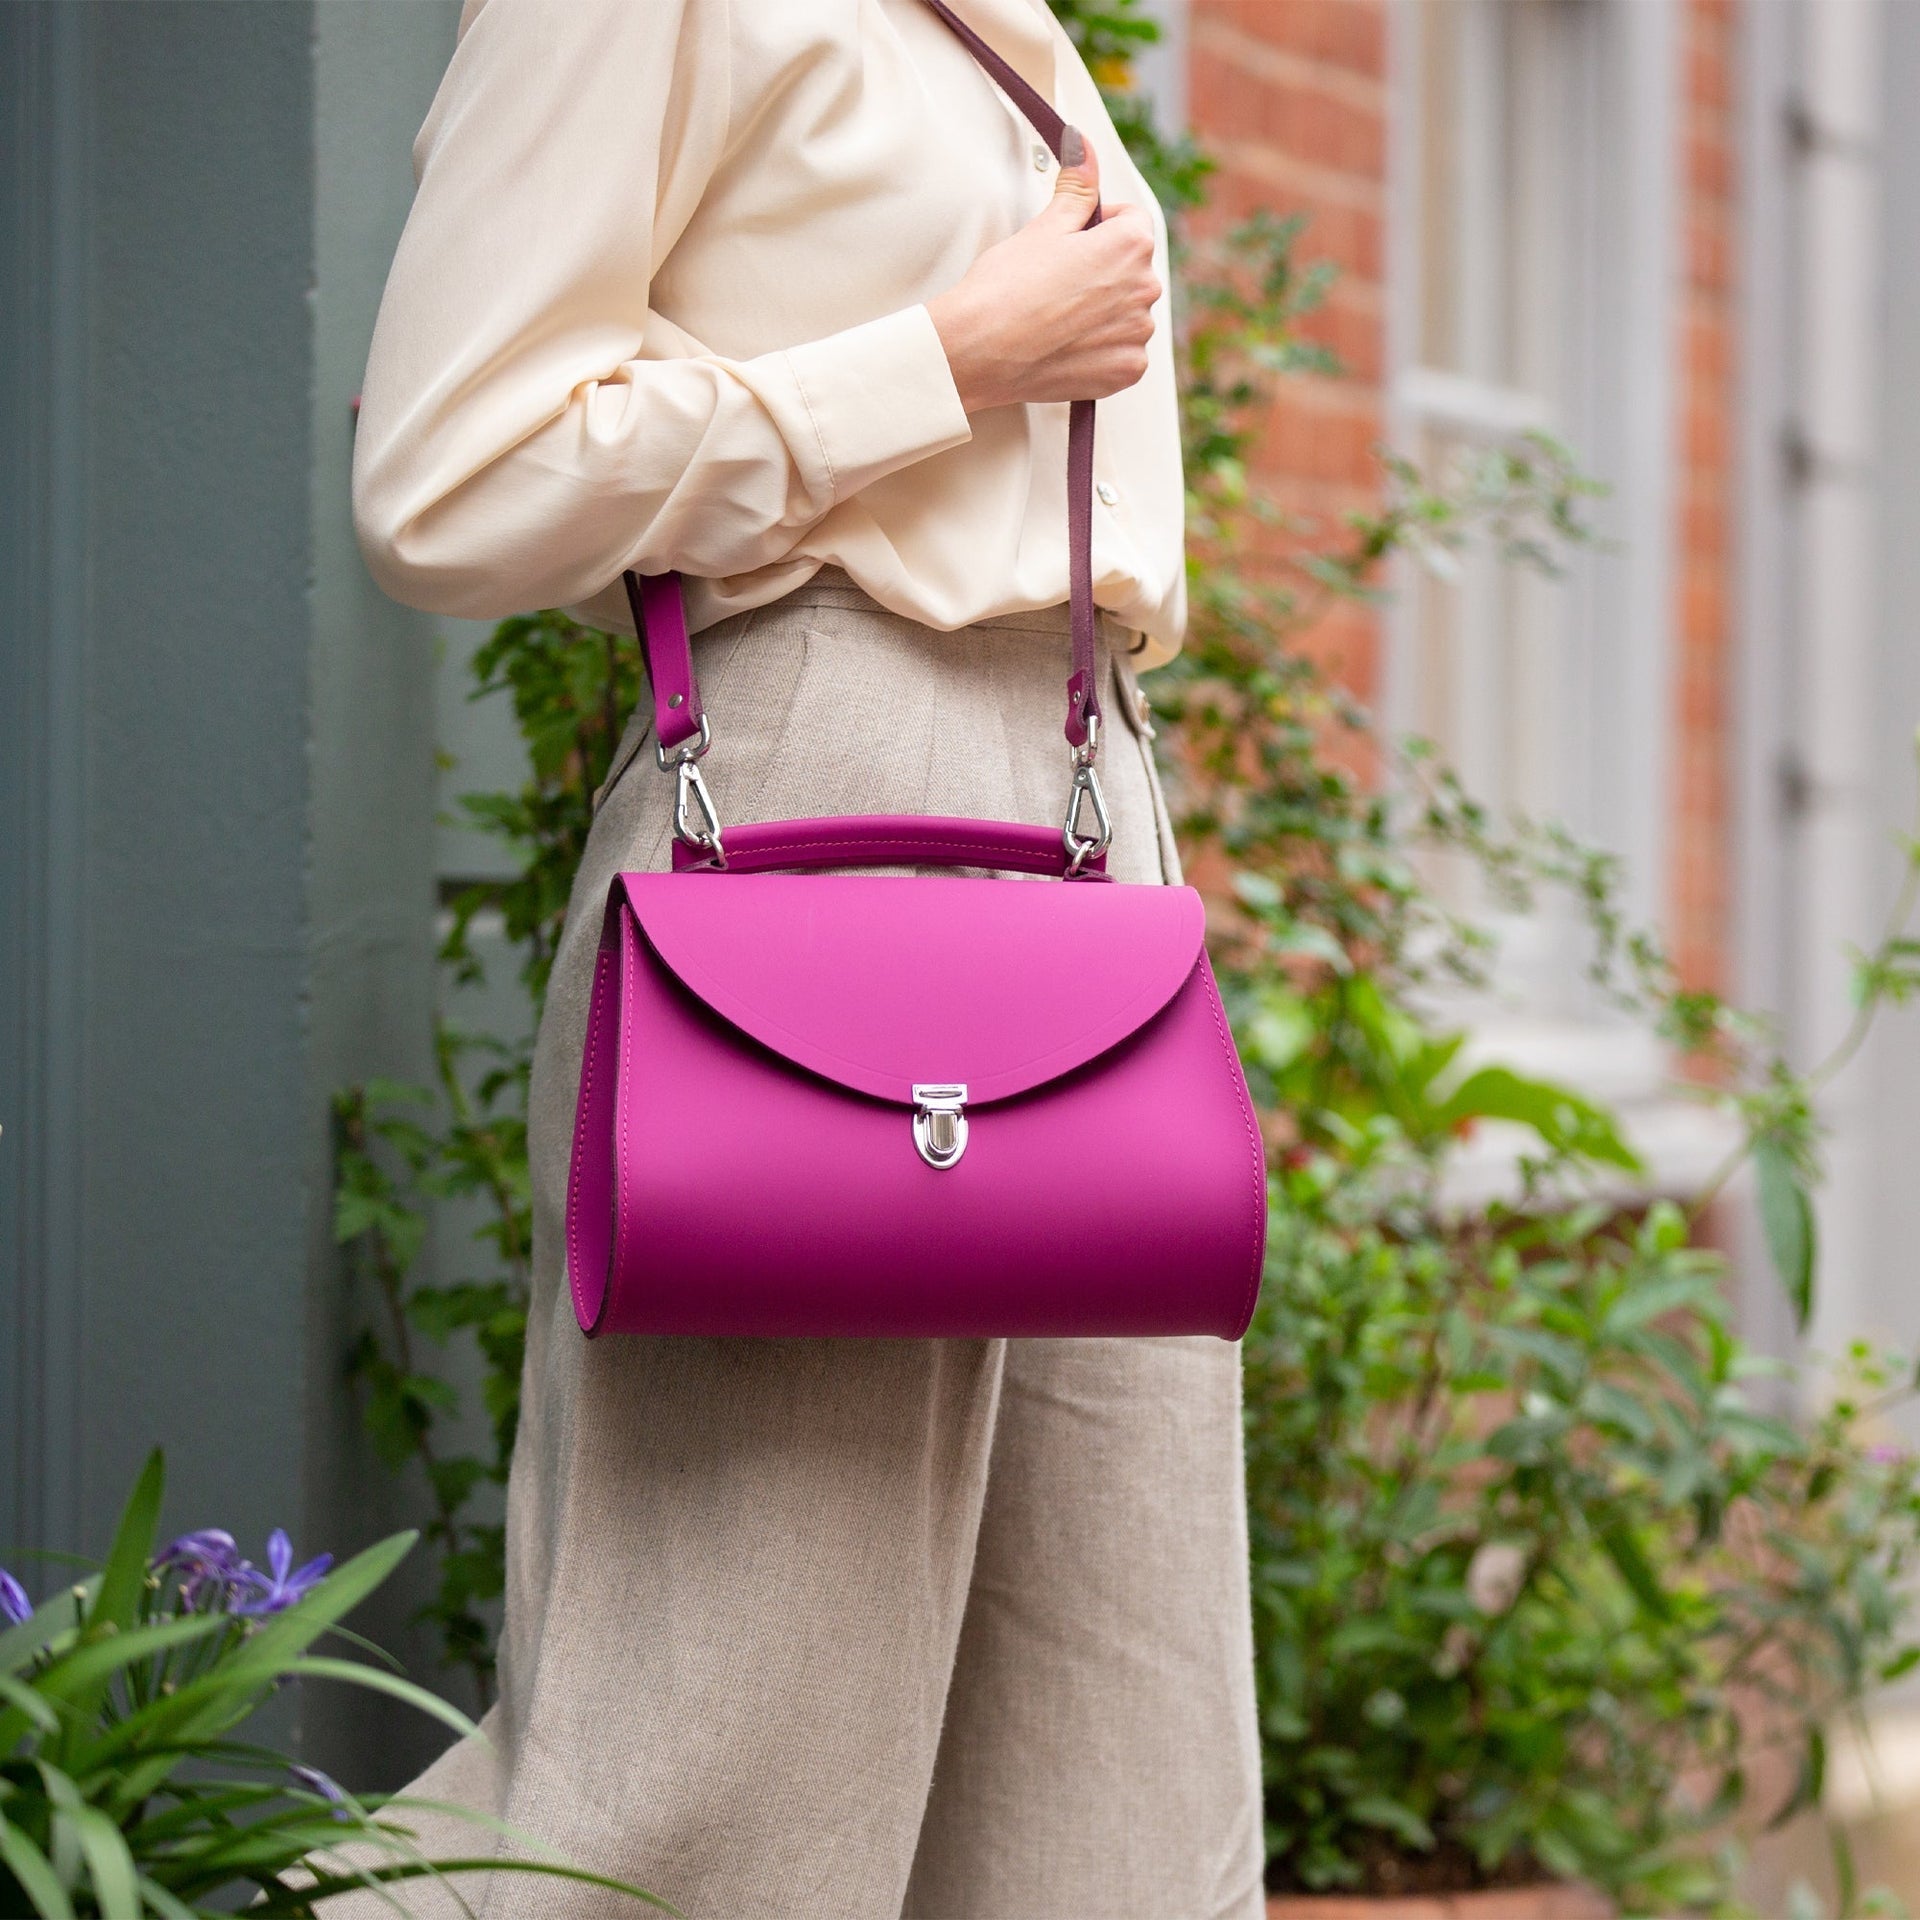 Introducing The Shameless Collection - The Cambridge Satchel Company EU Store